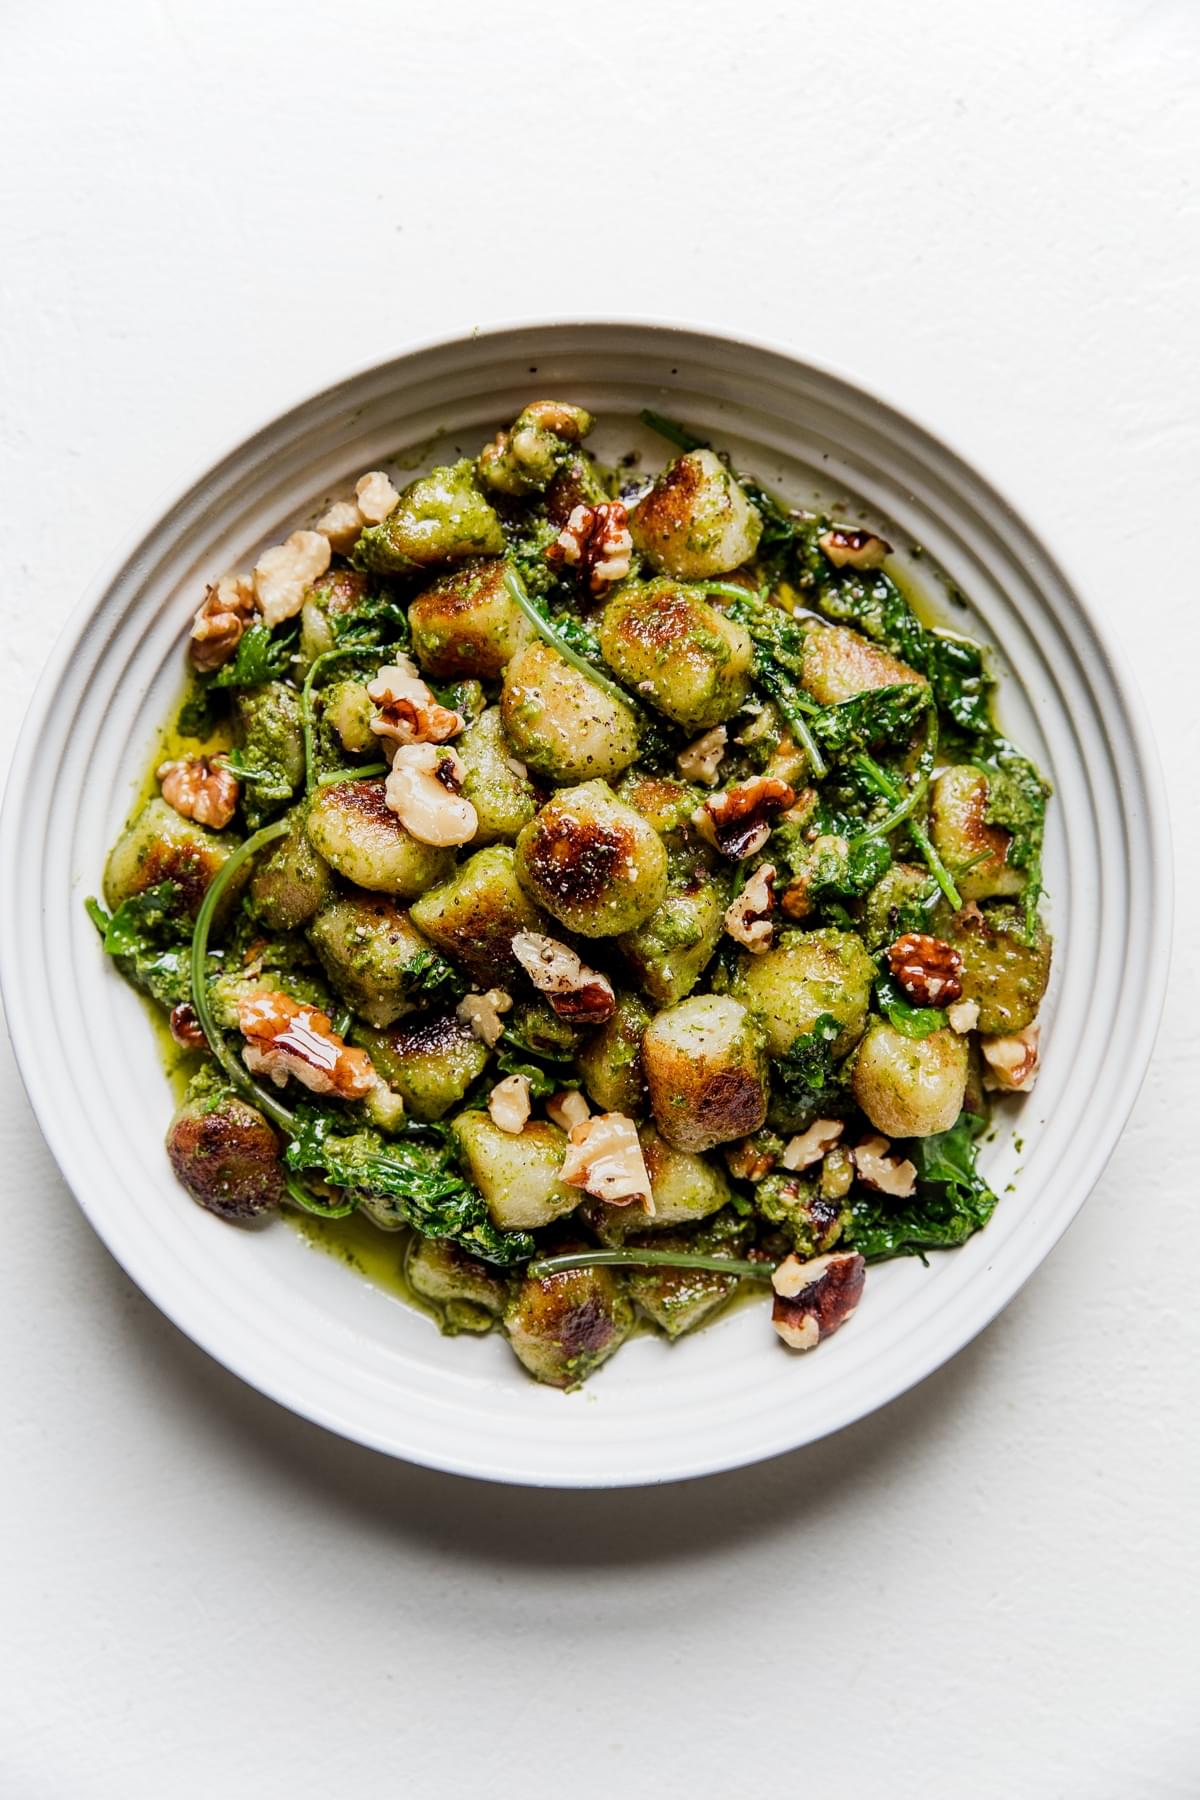 vegan Cauliflower gnocchi with kale-cashew pesto topped with toasted walnuts in a white bowl